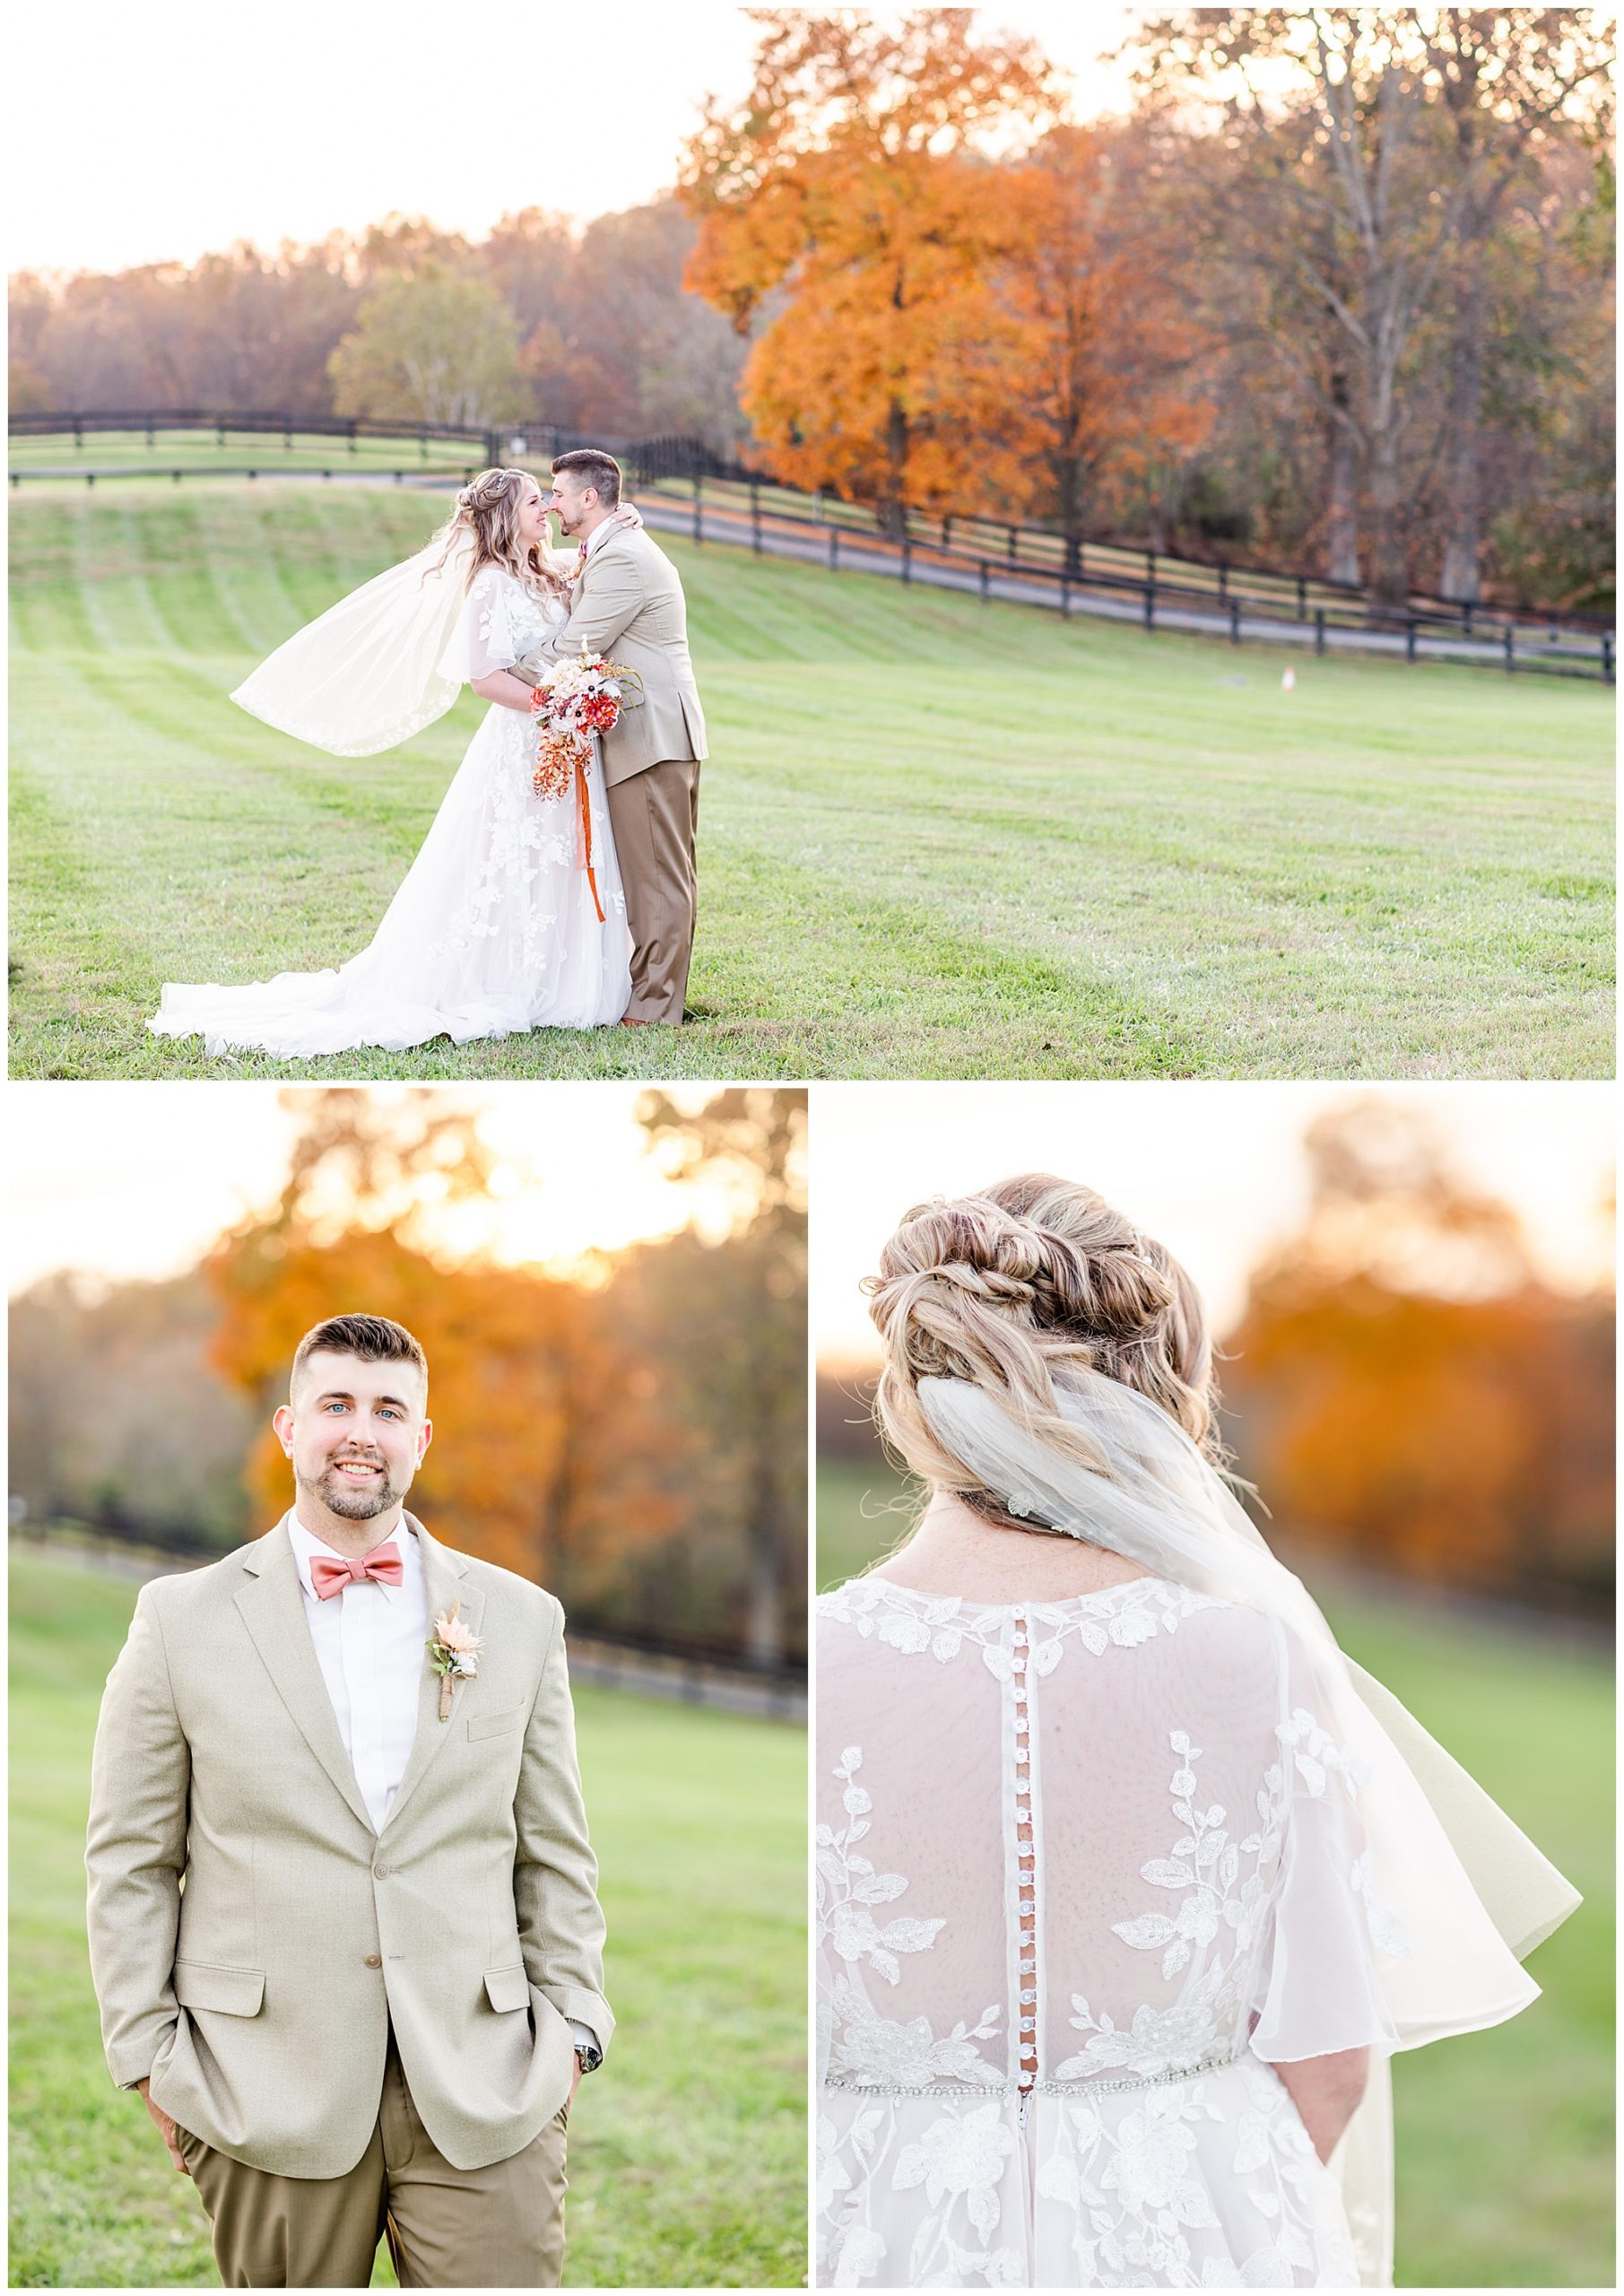 fall colors Middleburg Virginia wedding, Middleburg wedding, Middleburg wedding photographer, Loudoun County wedding photographer, northern Virginia wedding photographer, Middleburg Barn wedding, autumn wedding aesthetic, barn wedding aesthetic, elegant barn wedding, DC wedding photographer, Rachel E.H. Photography, bride and groom almost kissing in field, back of brides dress